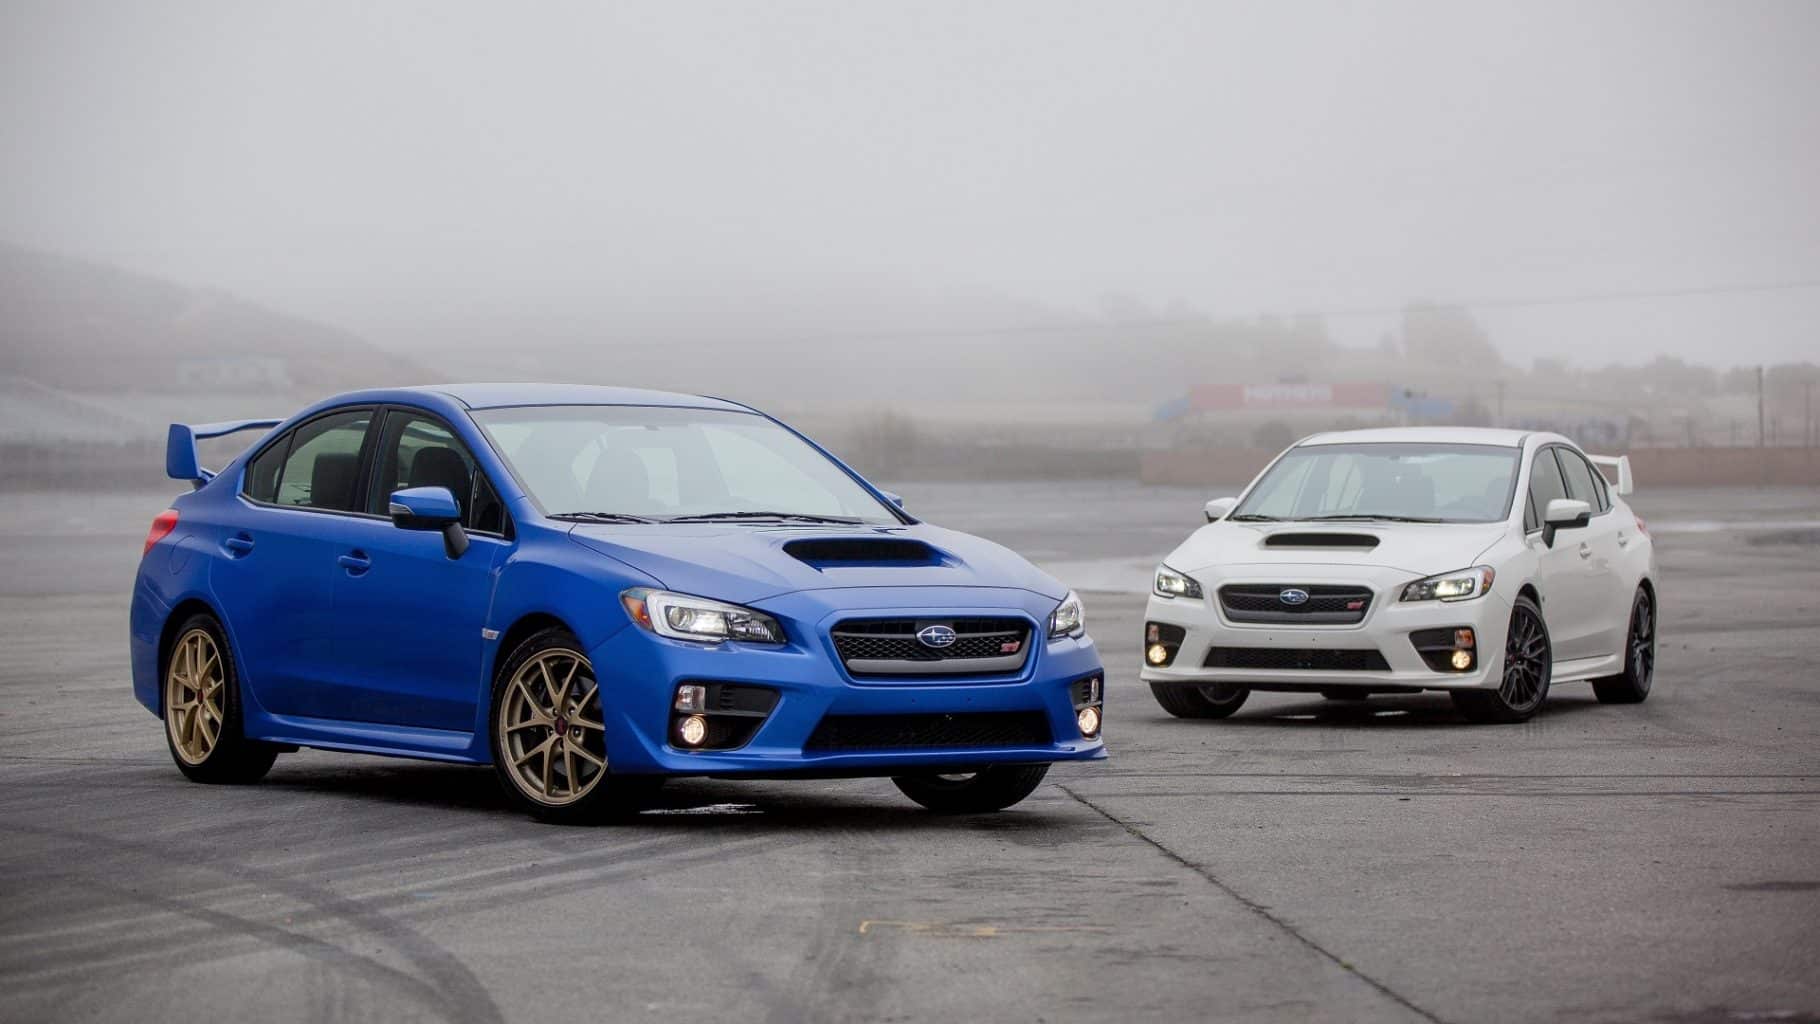 What Is The Difference Between WRX And STI